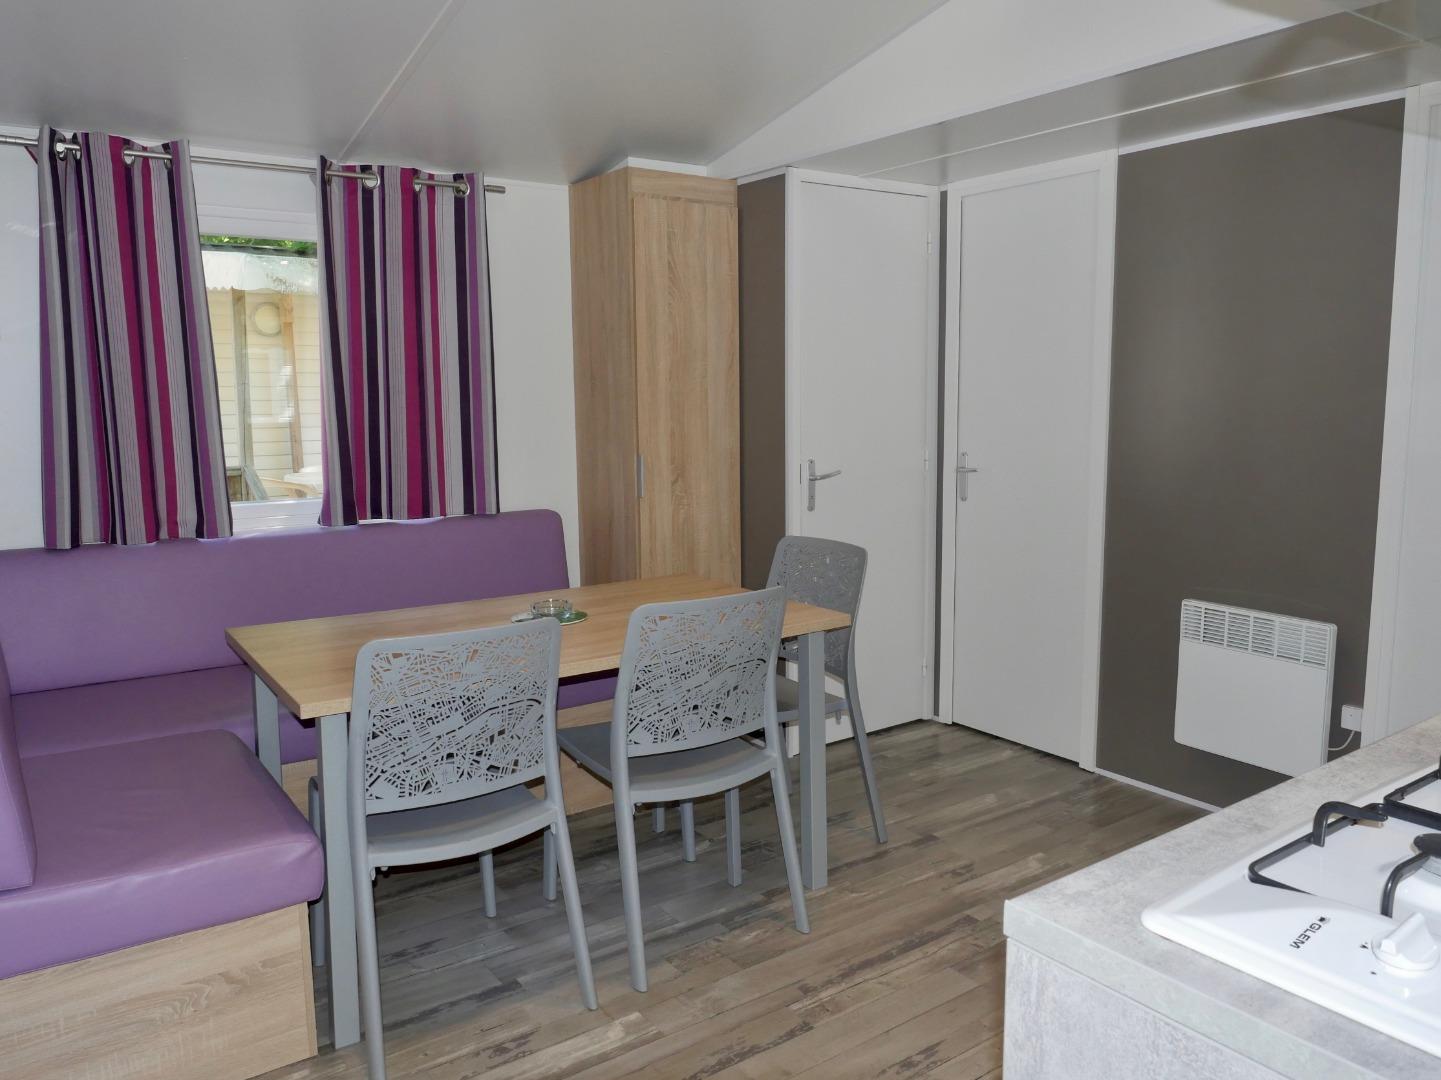 Location - Mobil-Home - 3 Chambres - 33.20M² - Climatisation - Terrasse En Bois - CAMPING LE CHASSEZAC